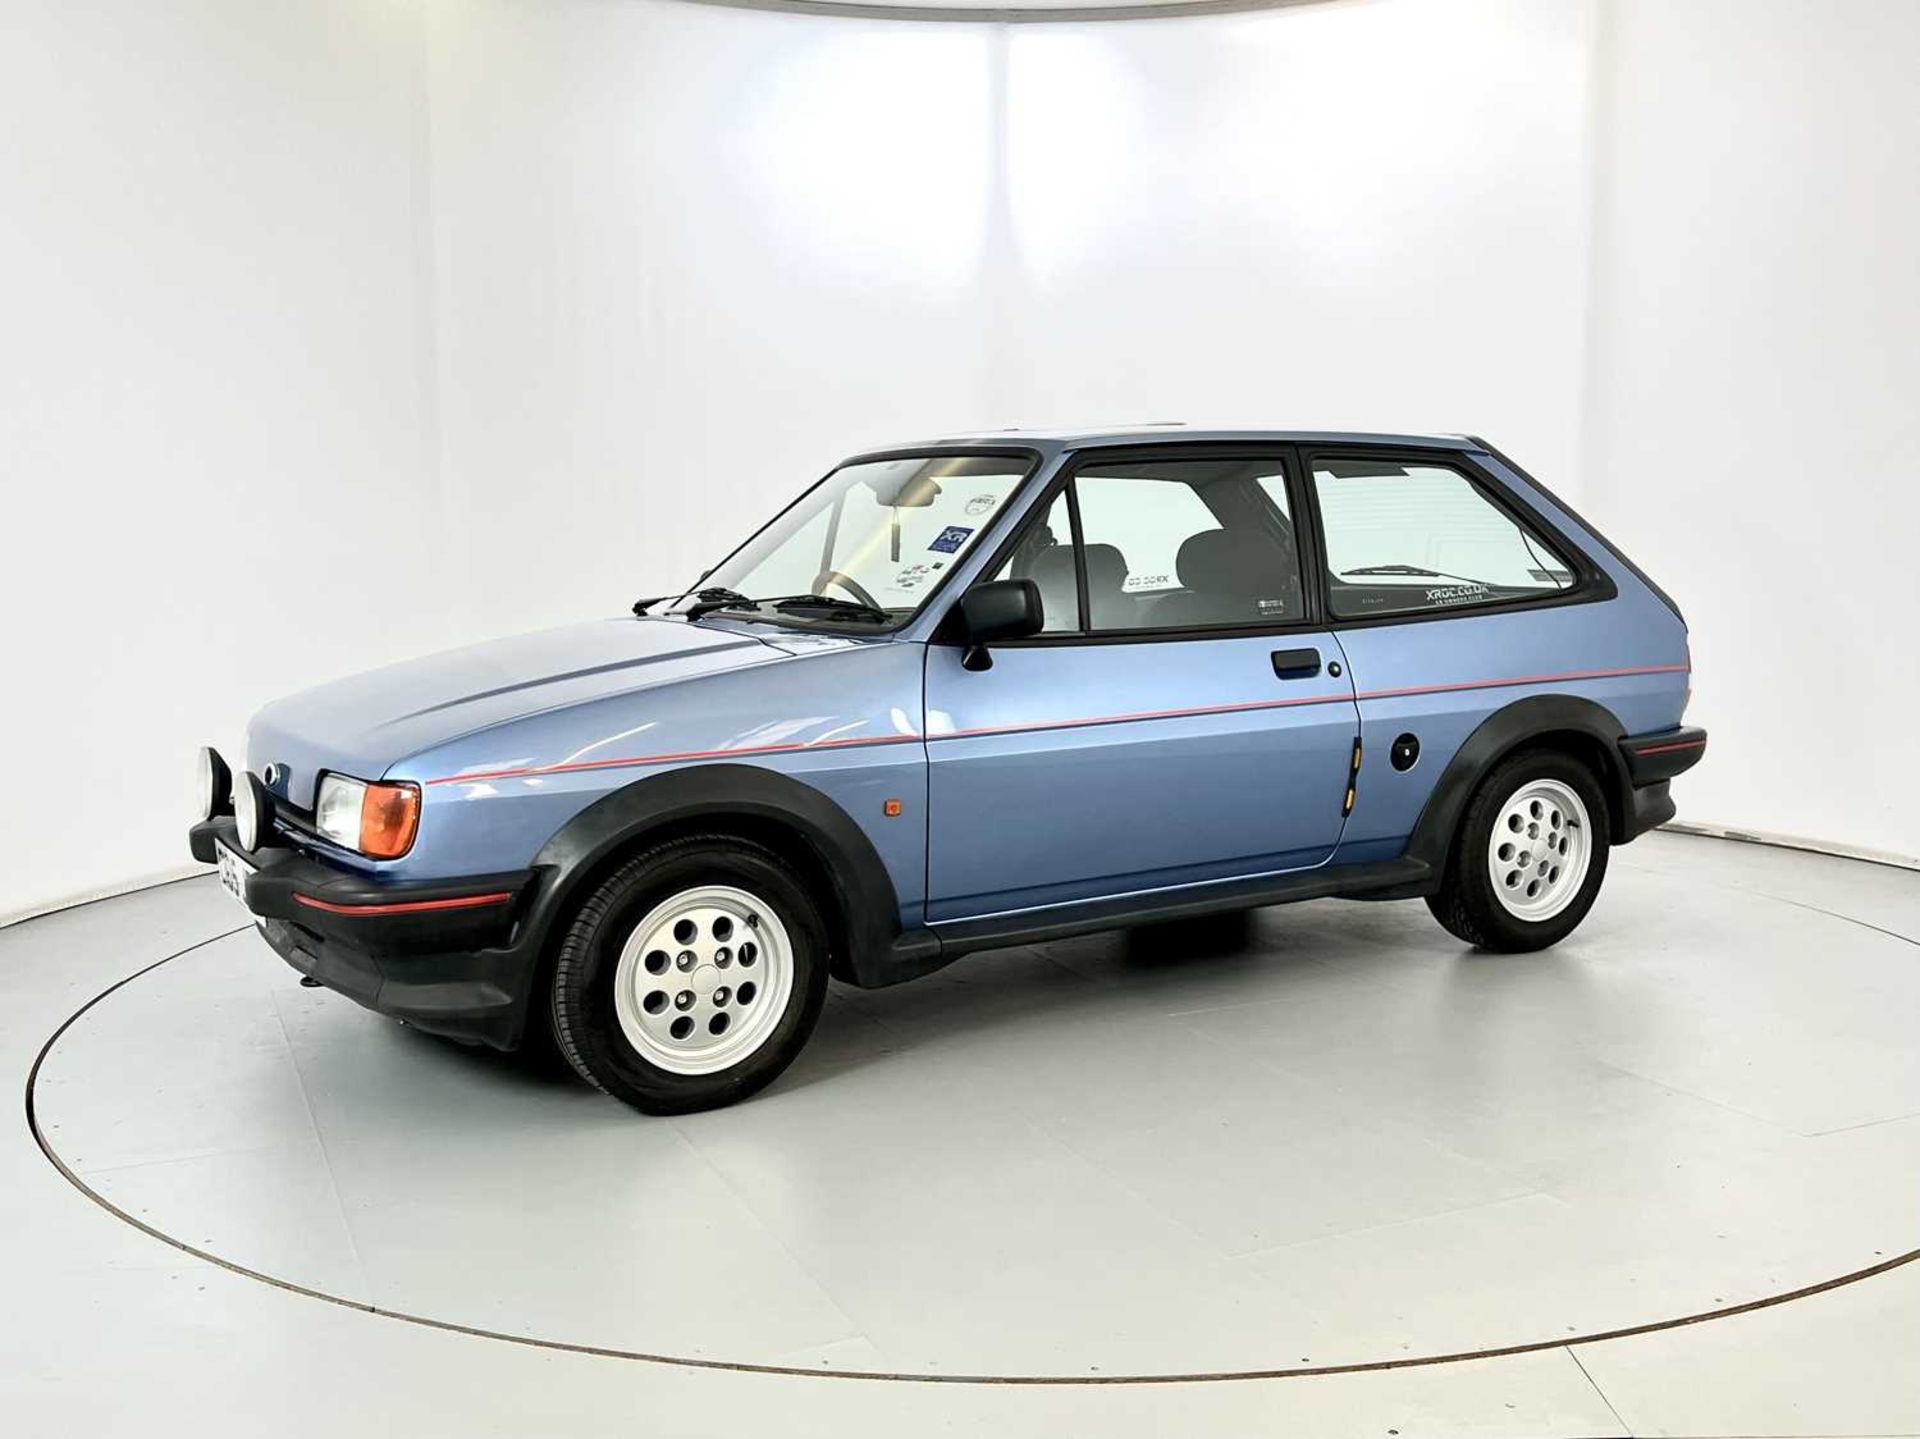 1986 Ford Fiesta XR2 - Image 4 of 33